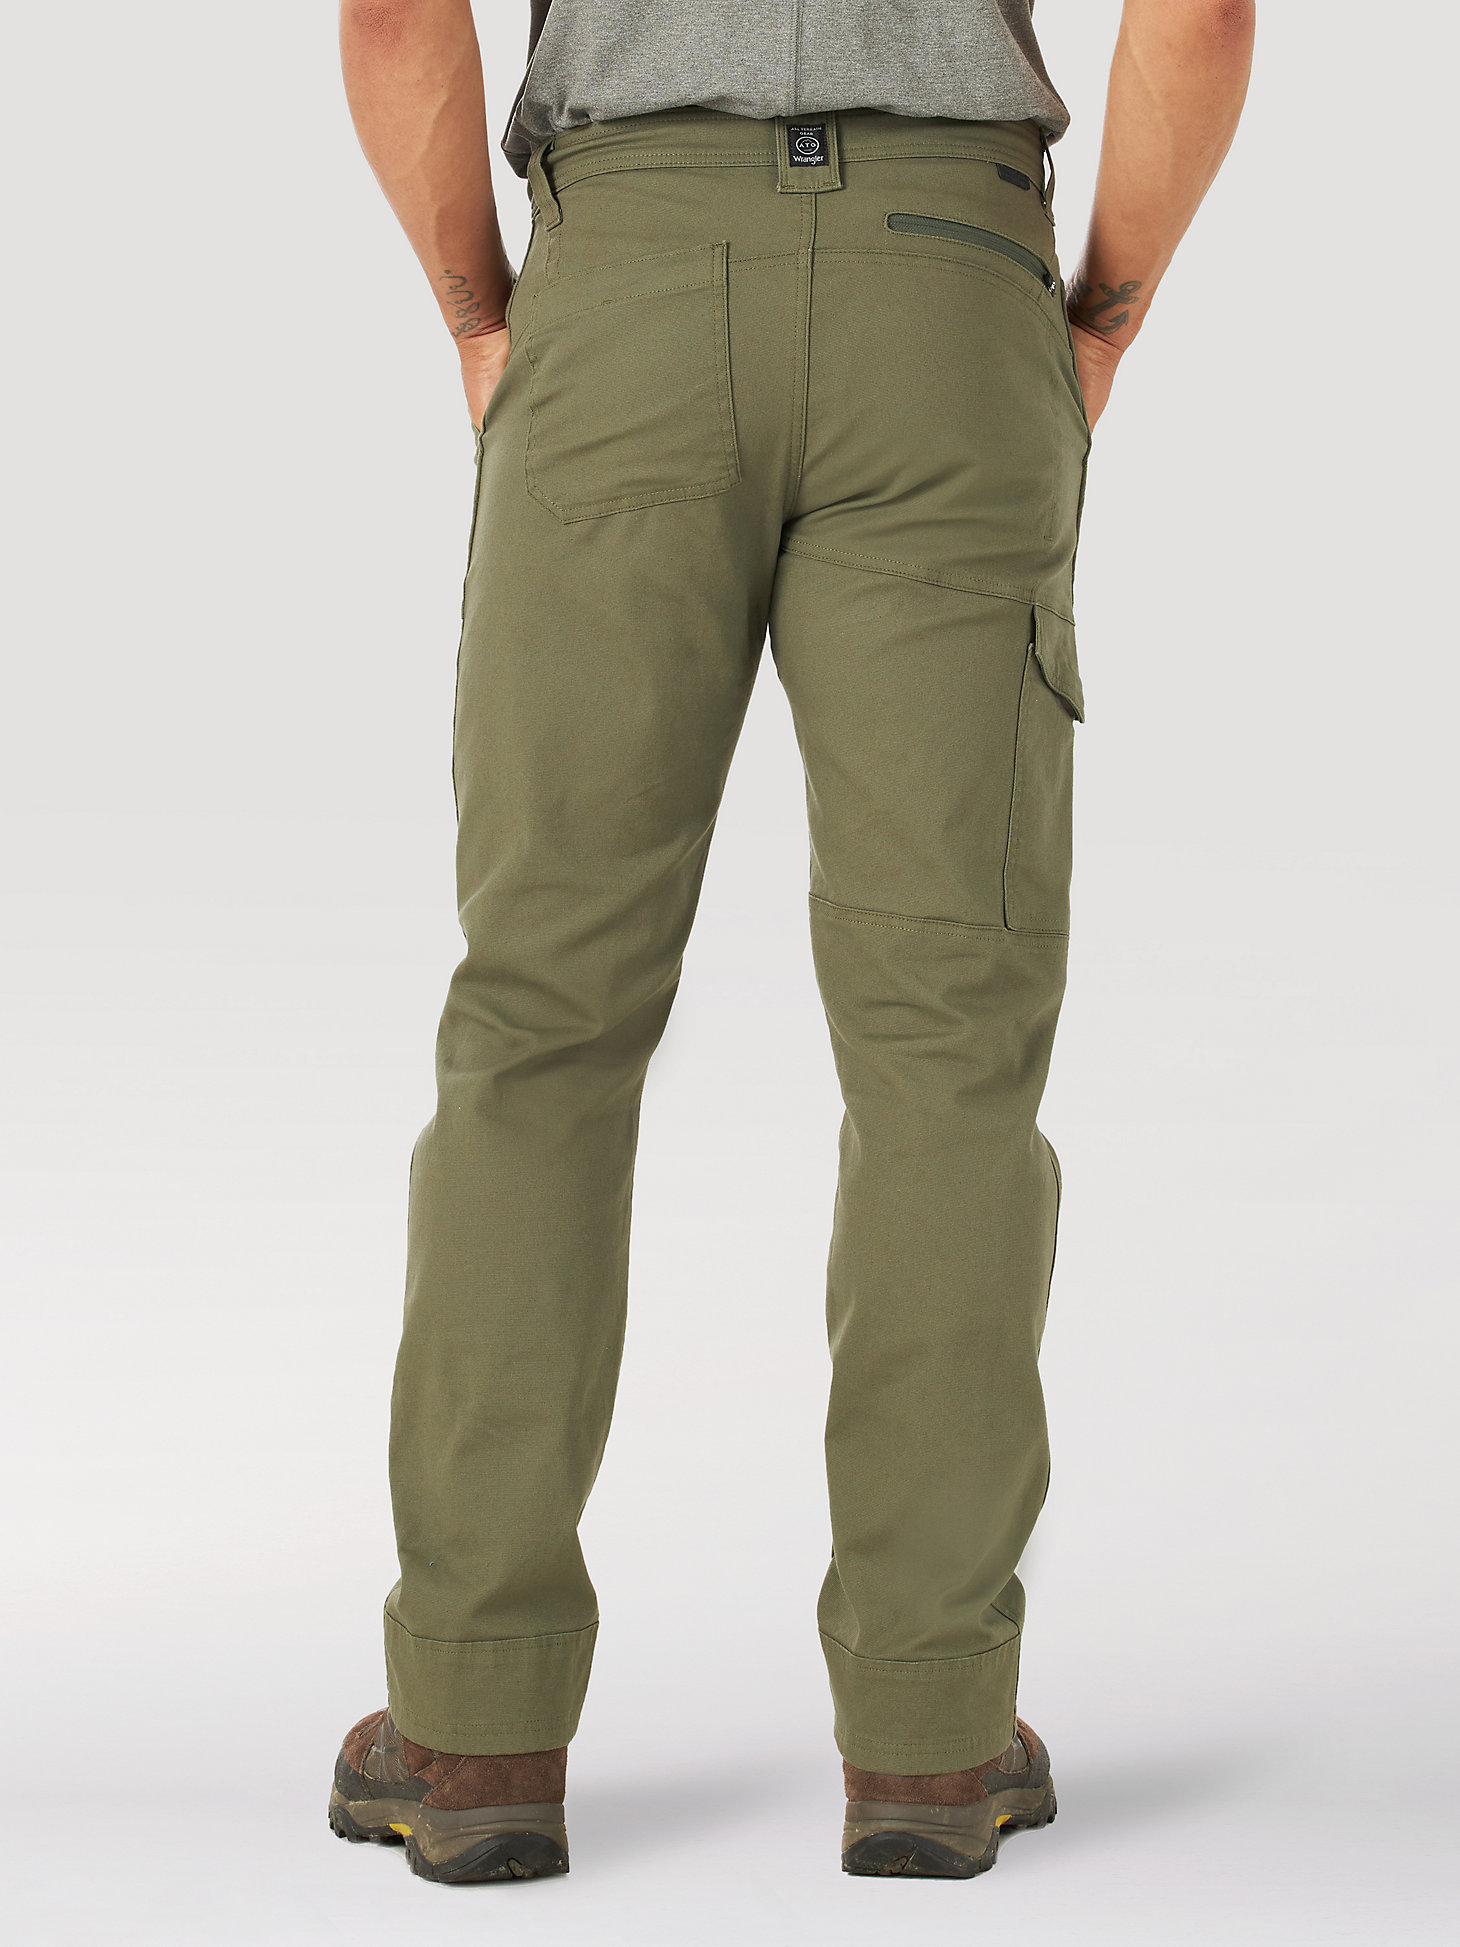 ATG by Wrangler™ Men's Canvas Cargo Pant in Industrial Green alternative view 1